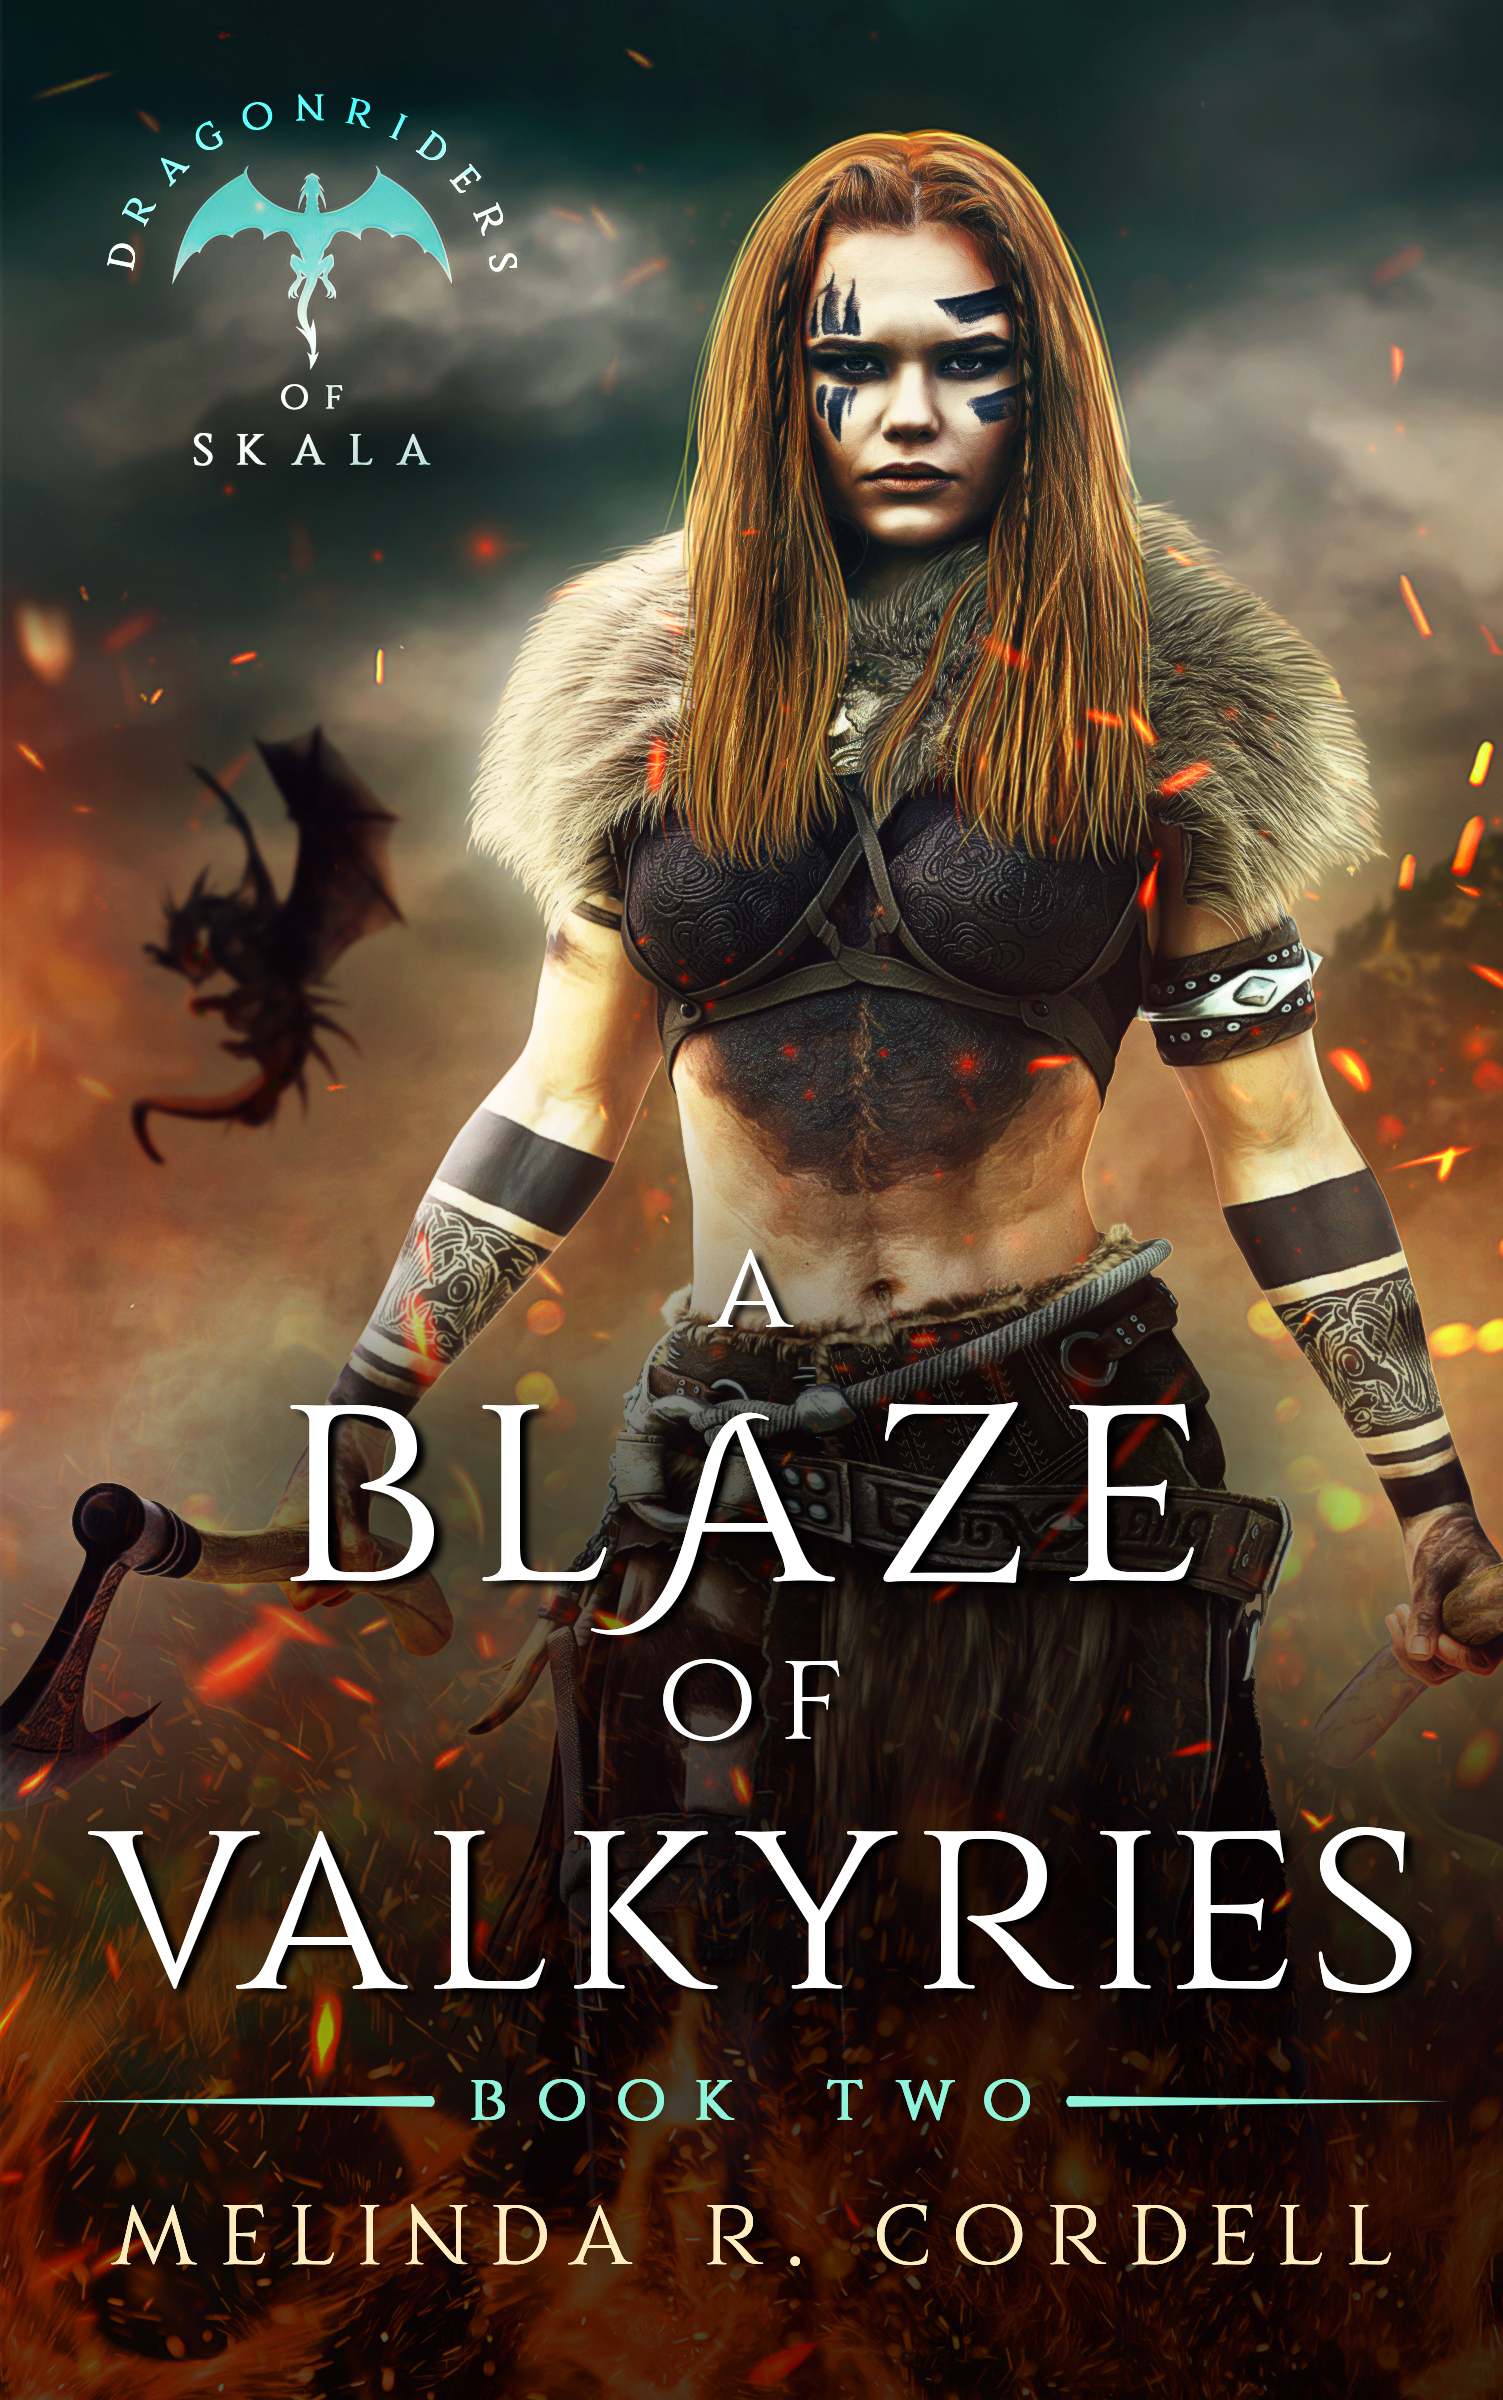 Book cover with a powerful Viking woman and a wicked dragon yo!